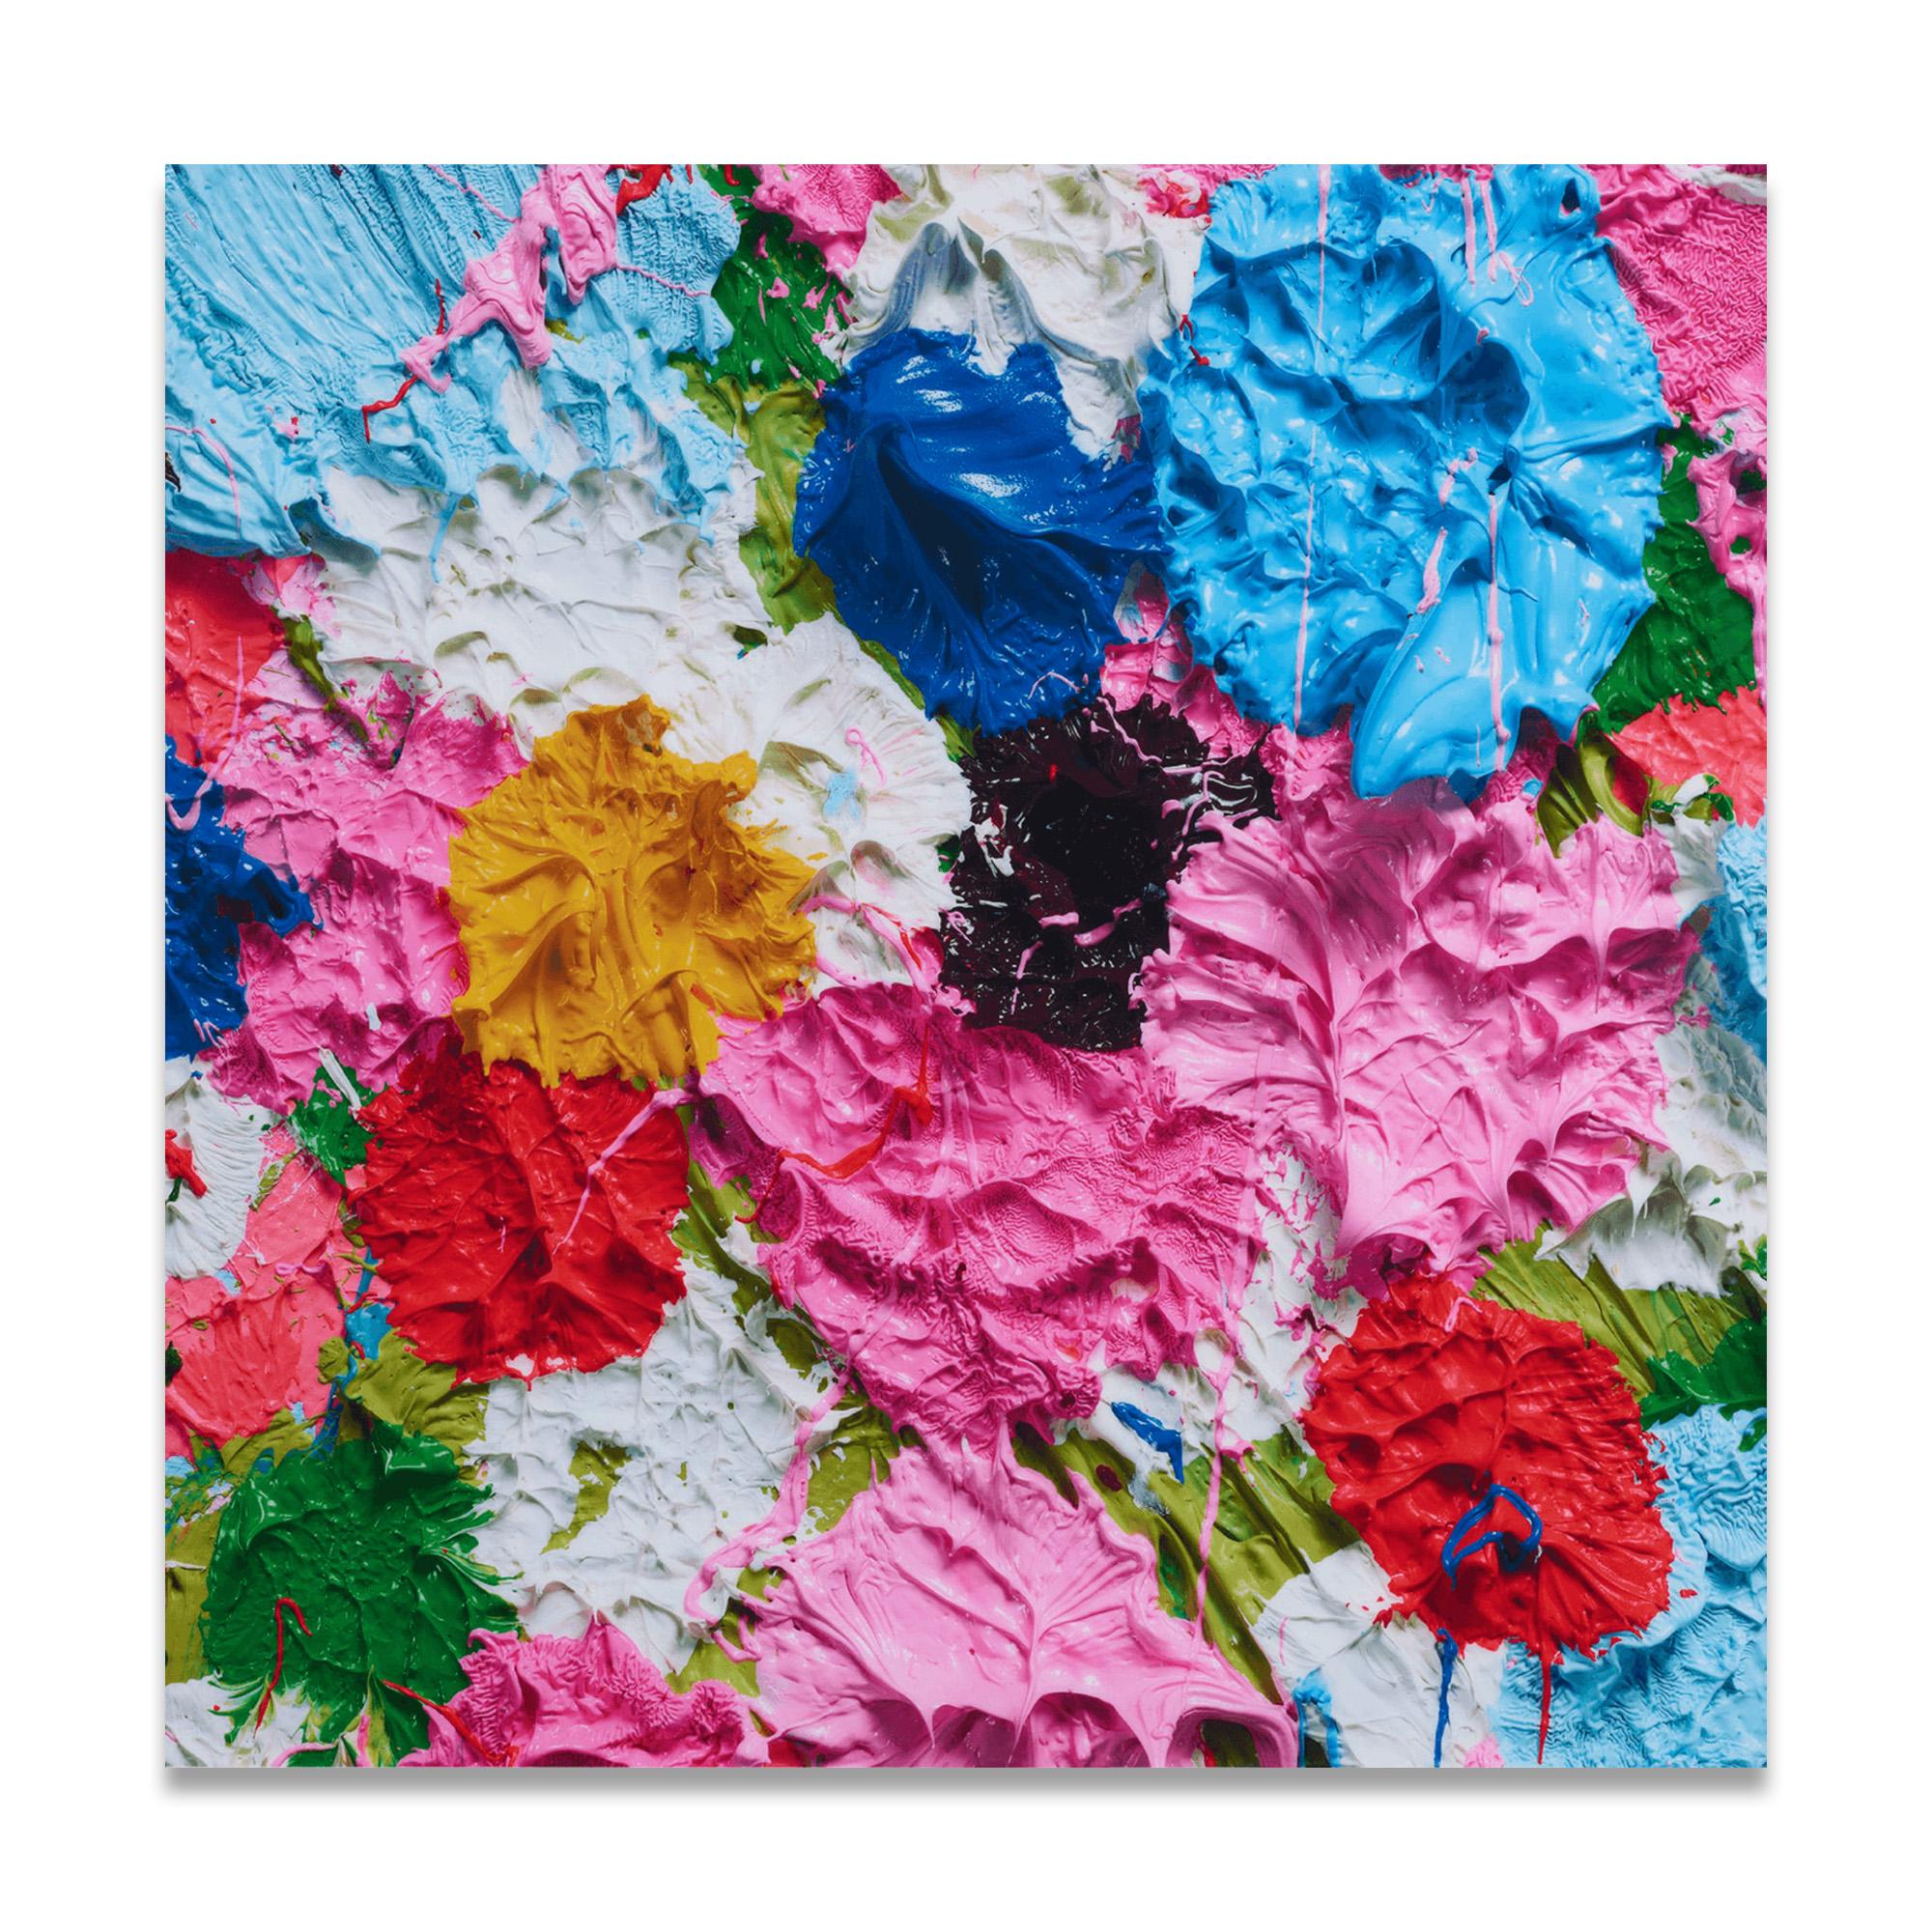 How many Damien Hirst spot paintings are there?